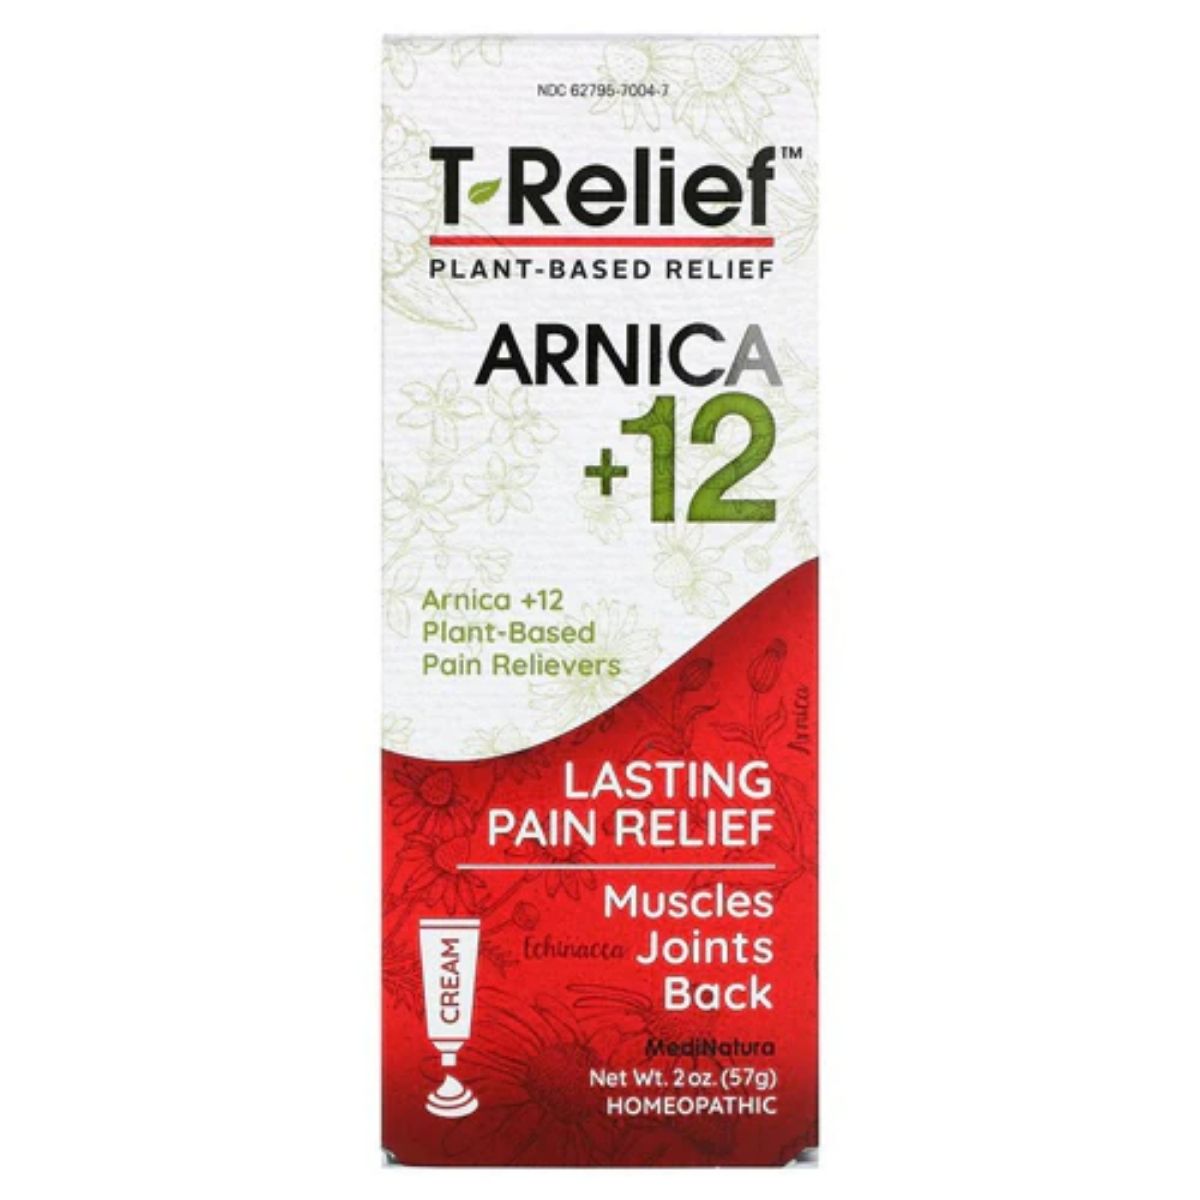 T-Relief: Pain Relief Cream on sale!